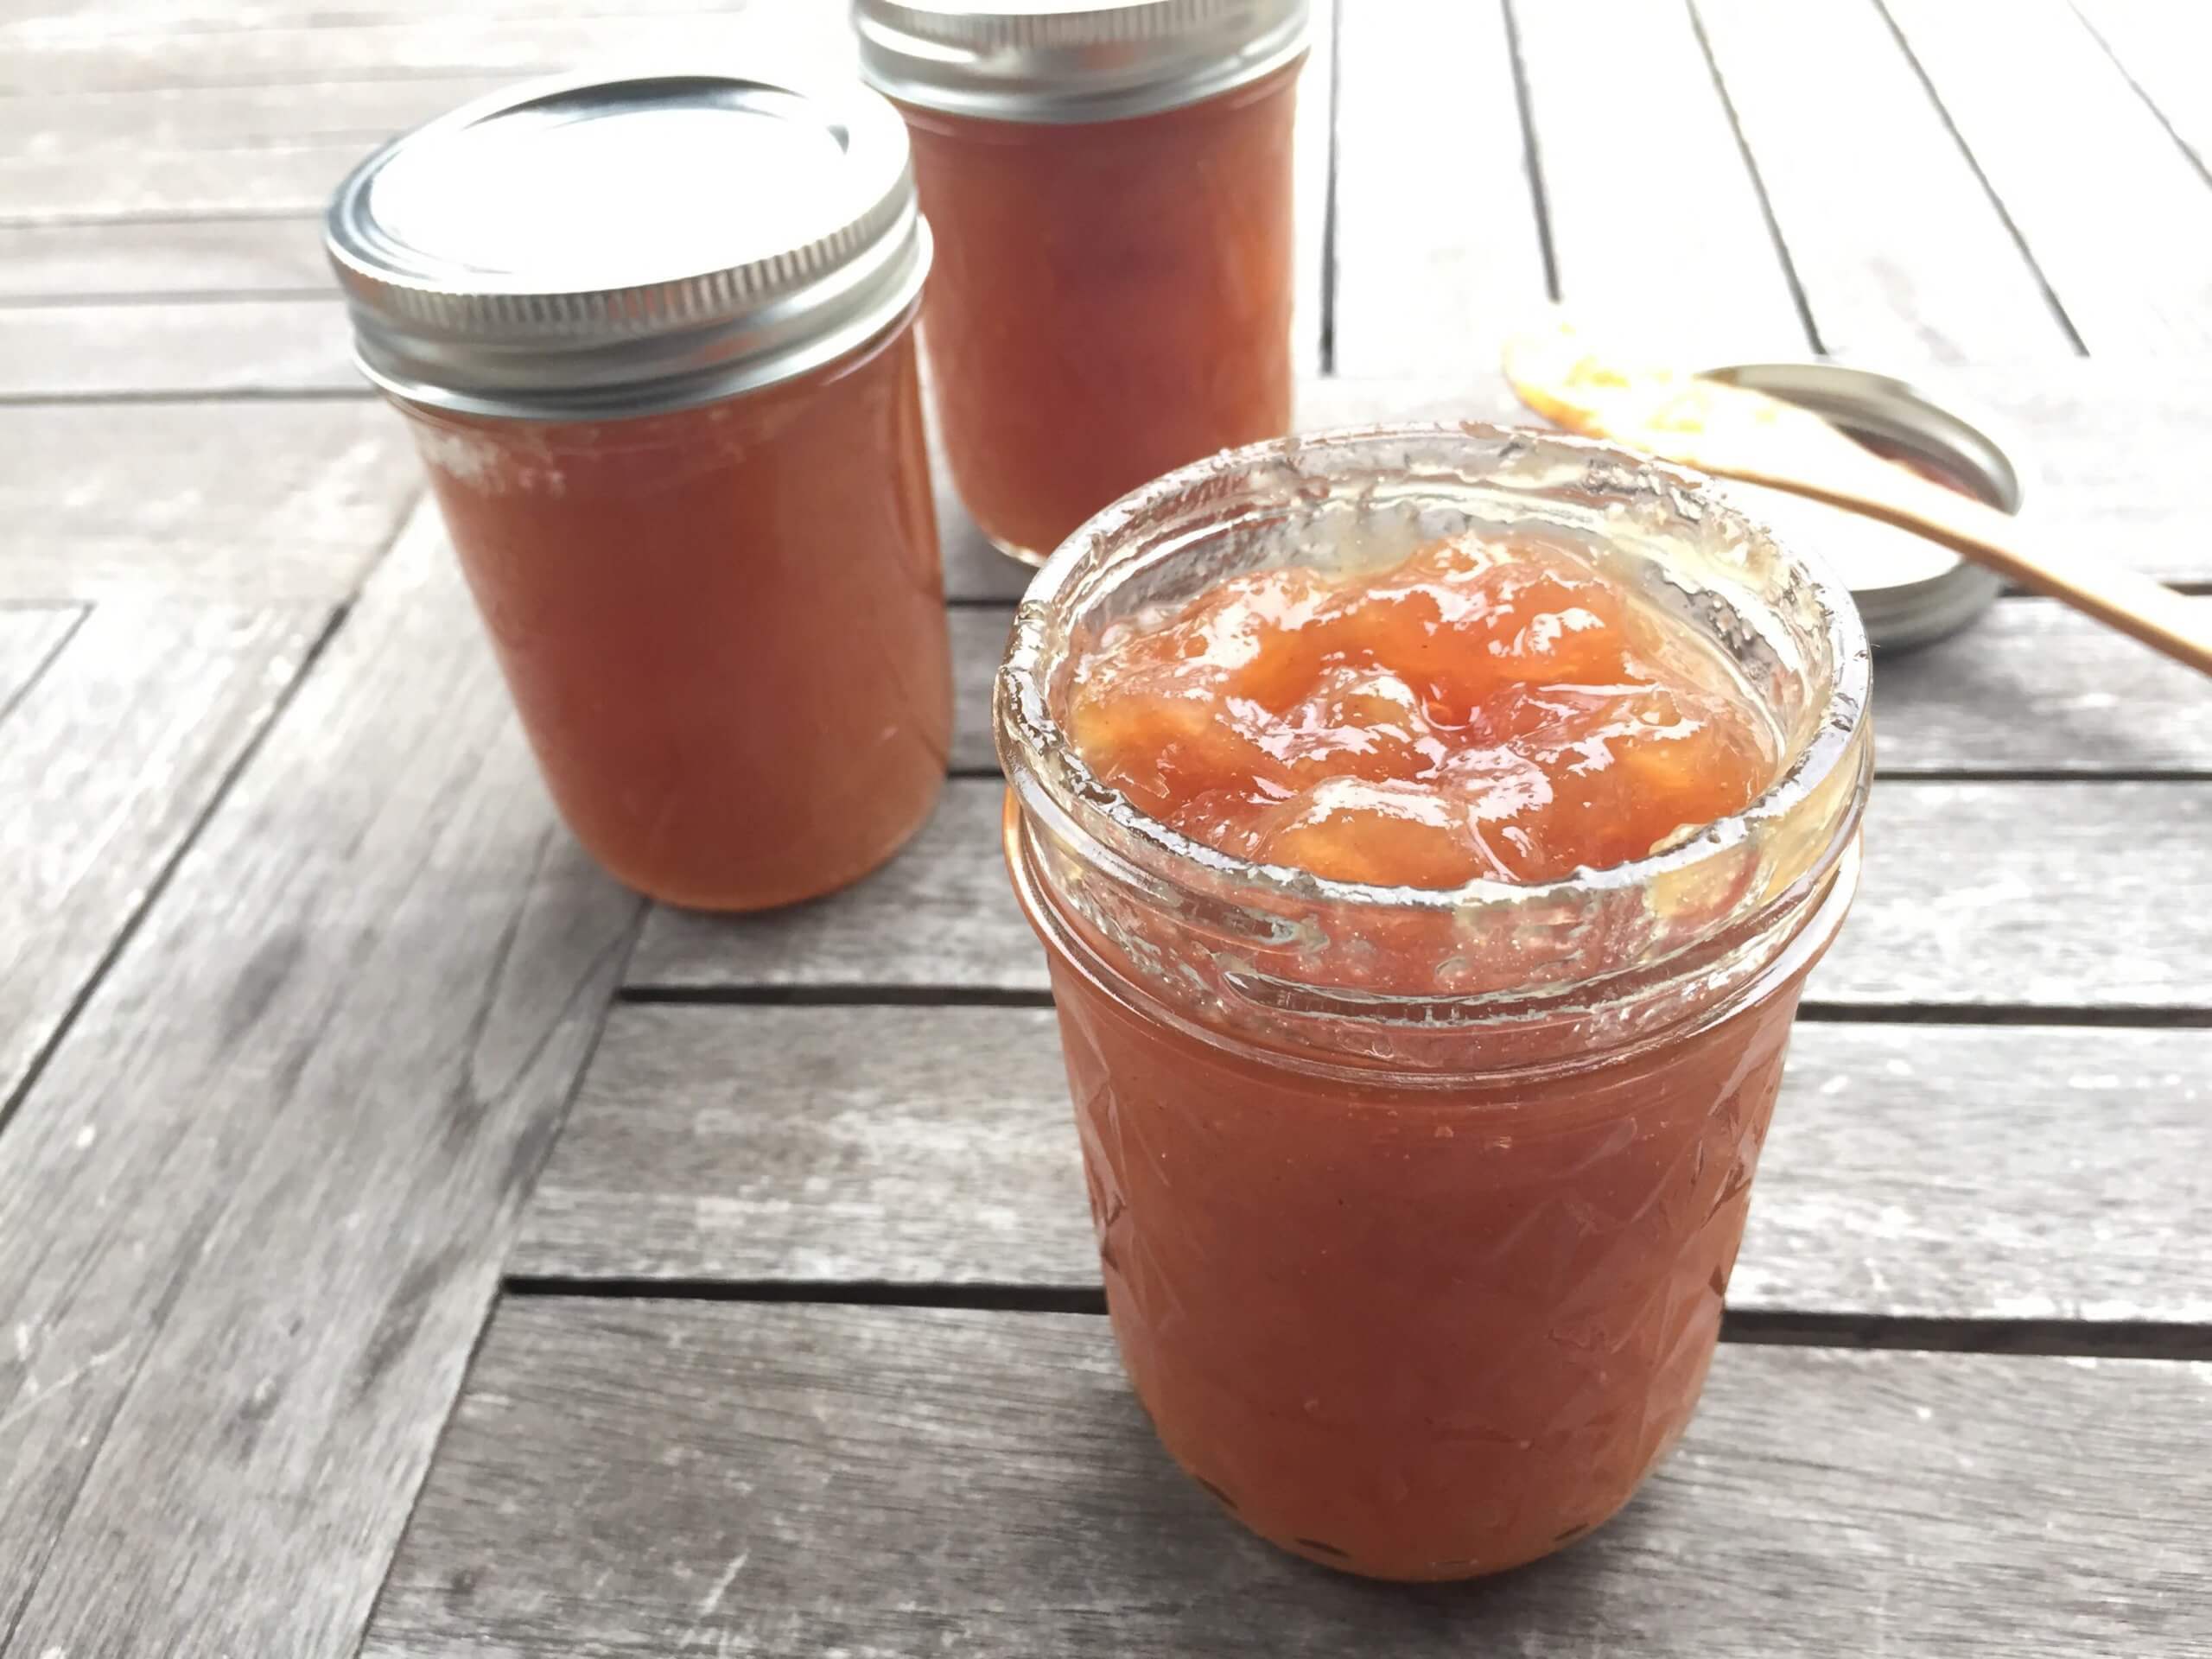 final product of cinnamon pear preserves in canning jars